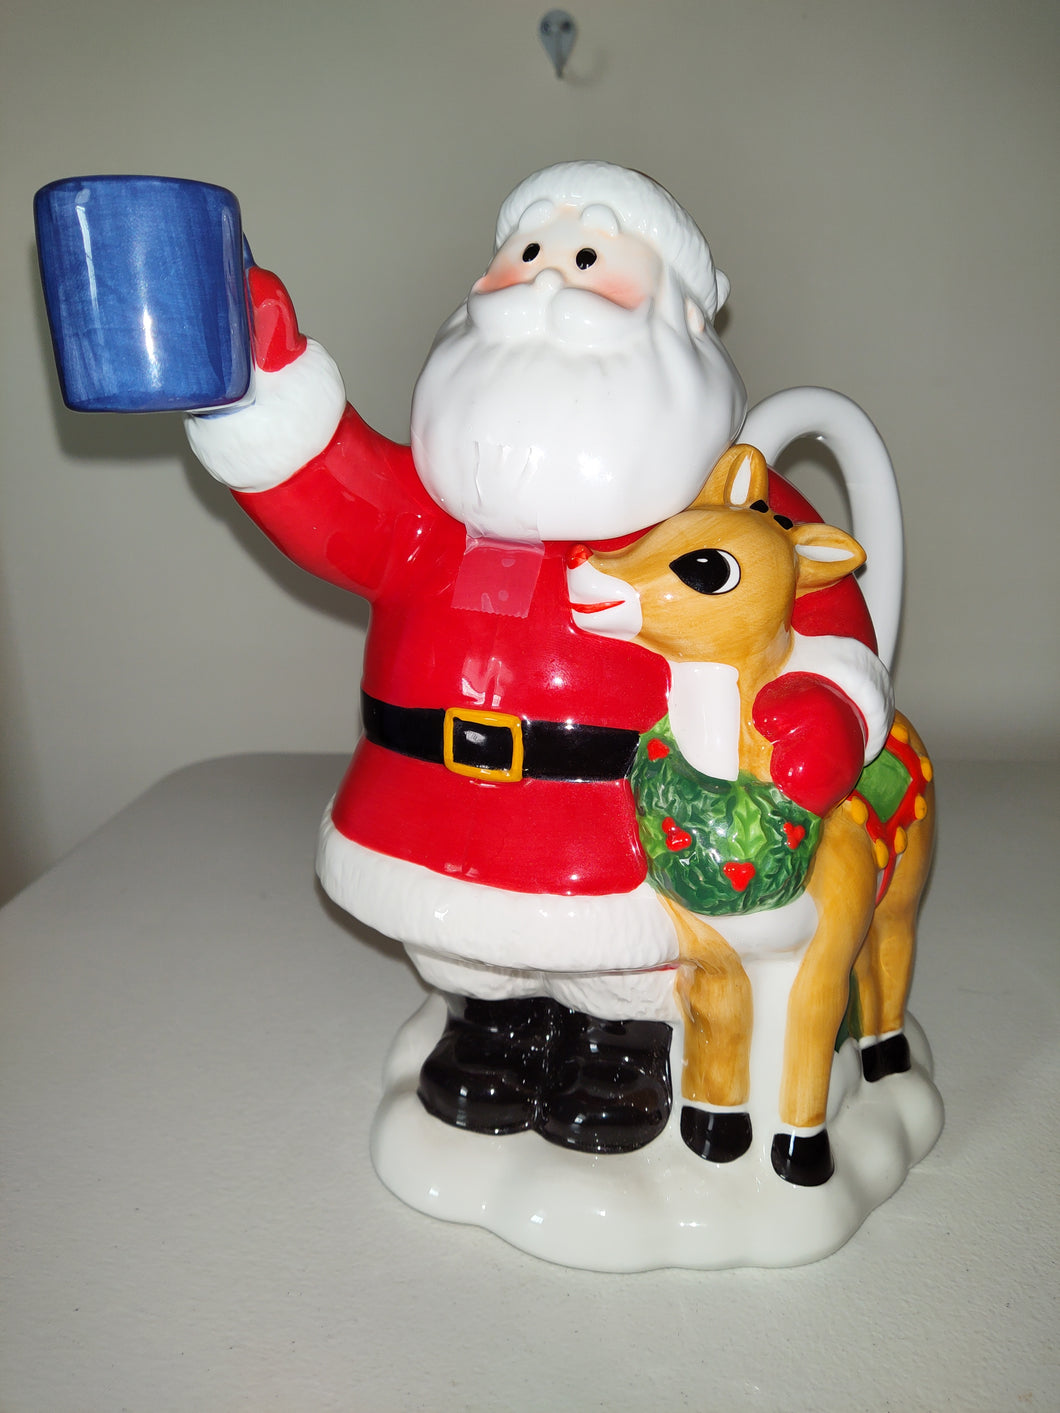 Lenox 2002 Holiday Teapot Santa & Rudolph Red Nosed Reindeer Christmas